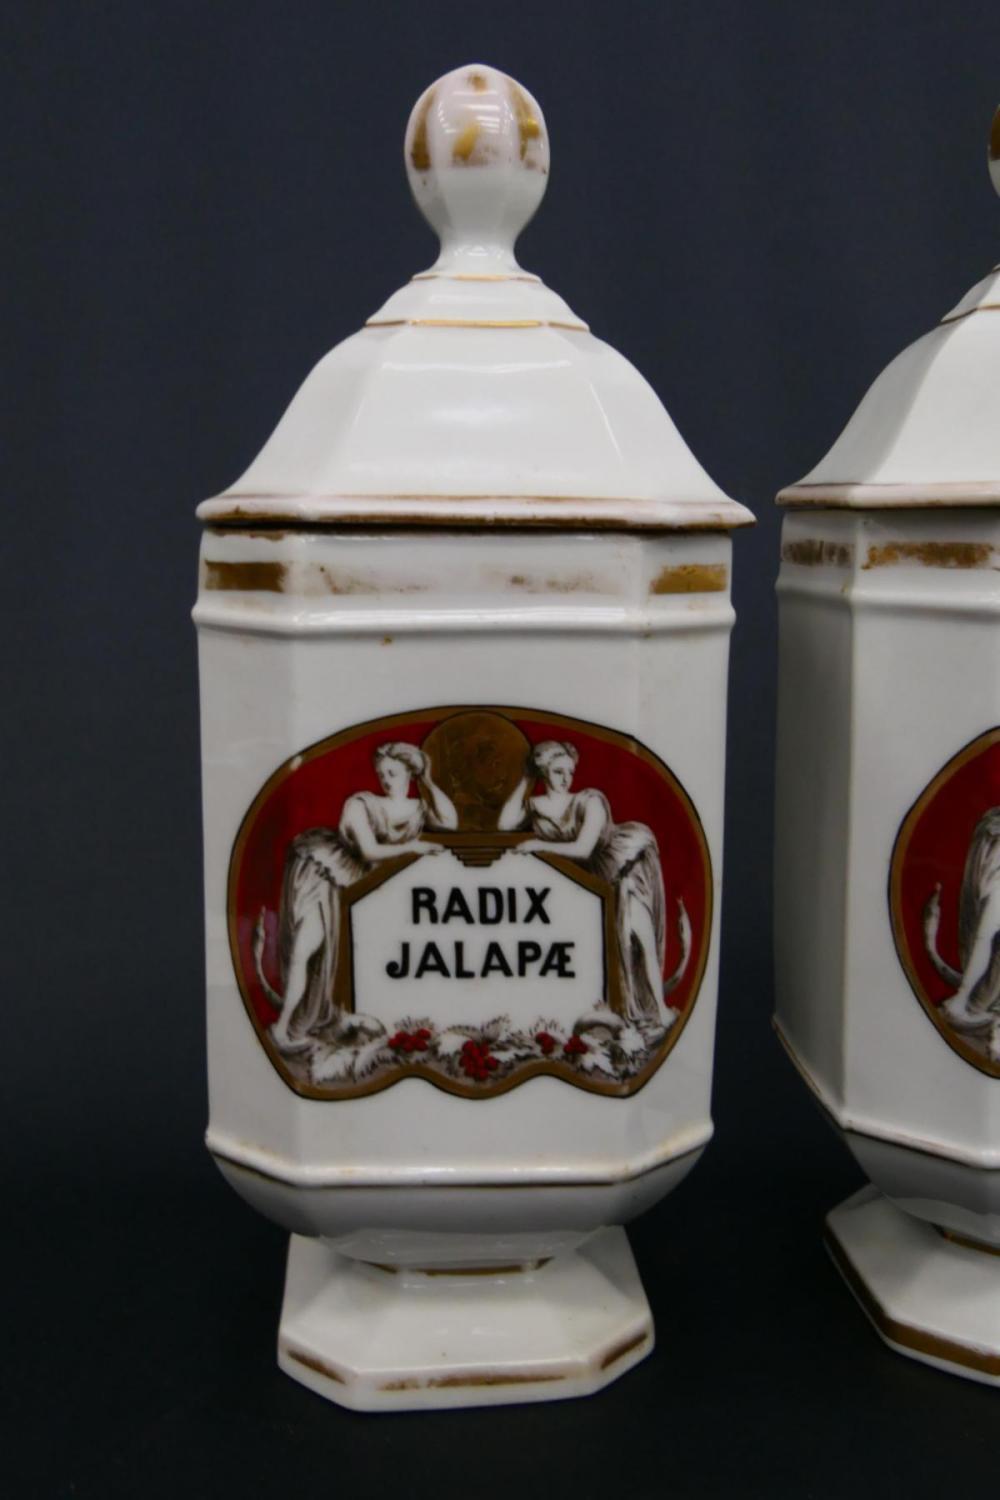 Date to the mid-19th century. Each jar measures about 12